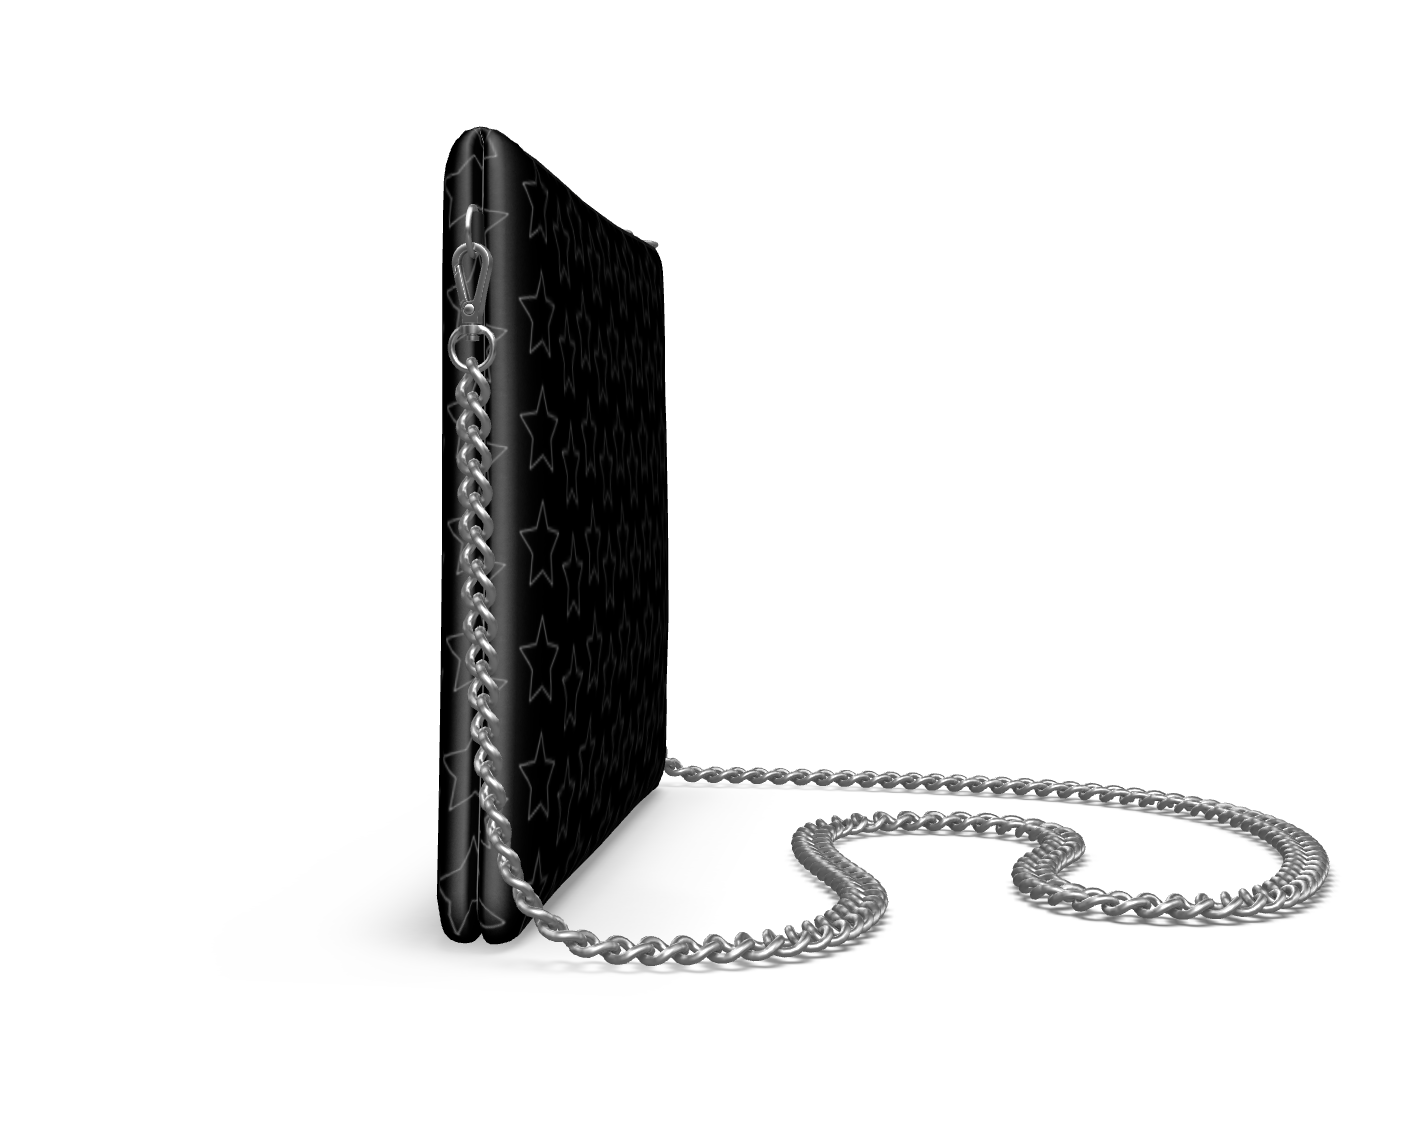 UNTITLED BOUTIQUE Black Leather Star Crossbody Bag With Silver Chain - Limited Edition